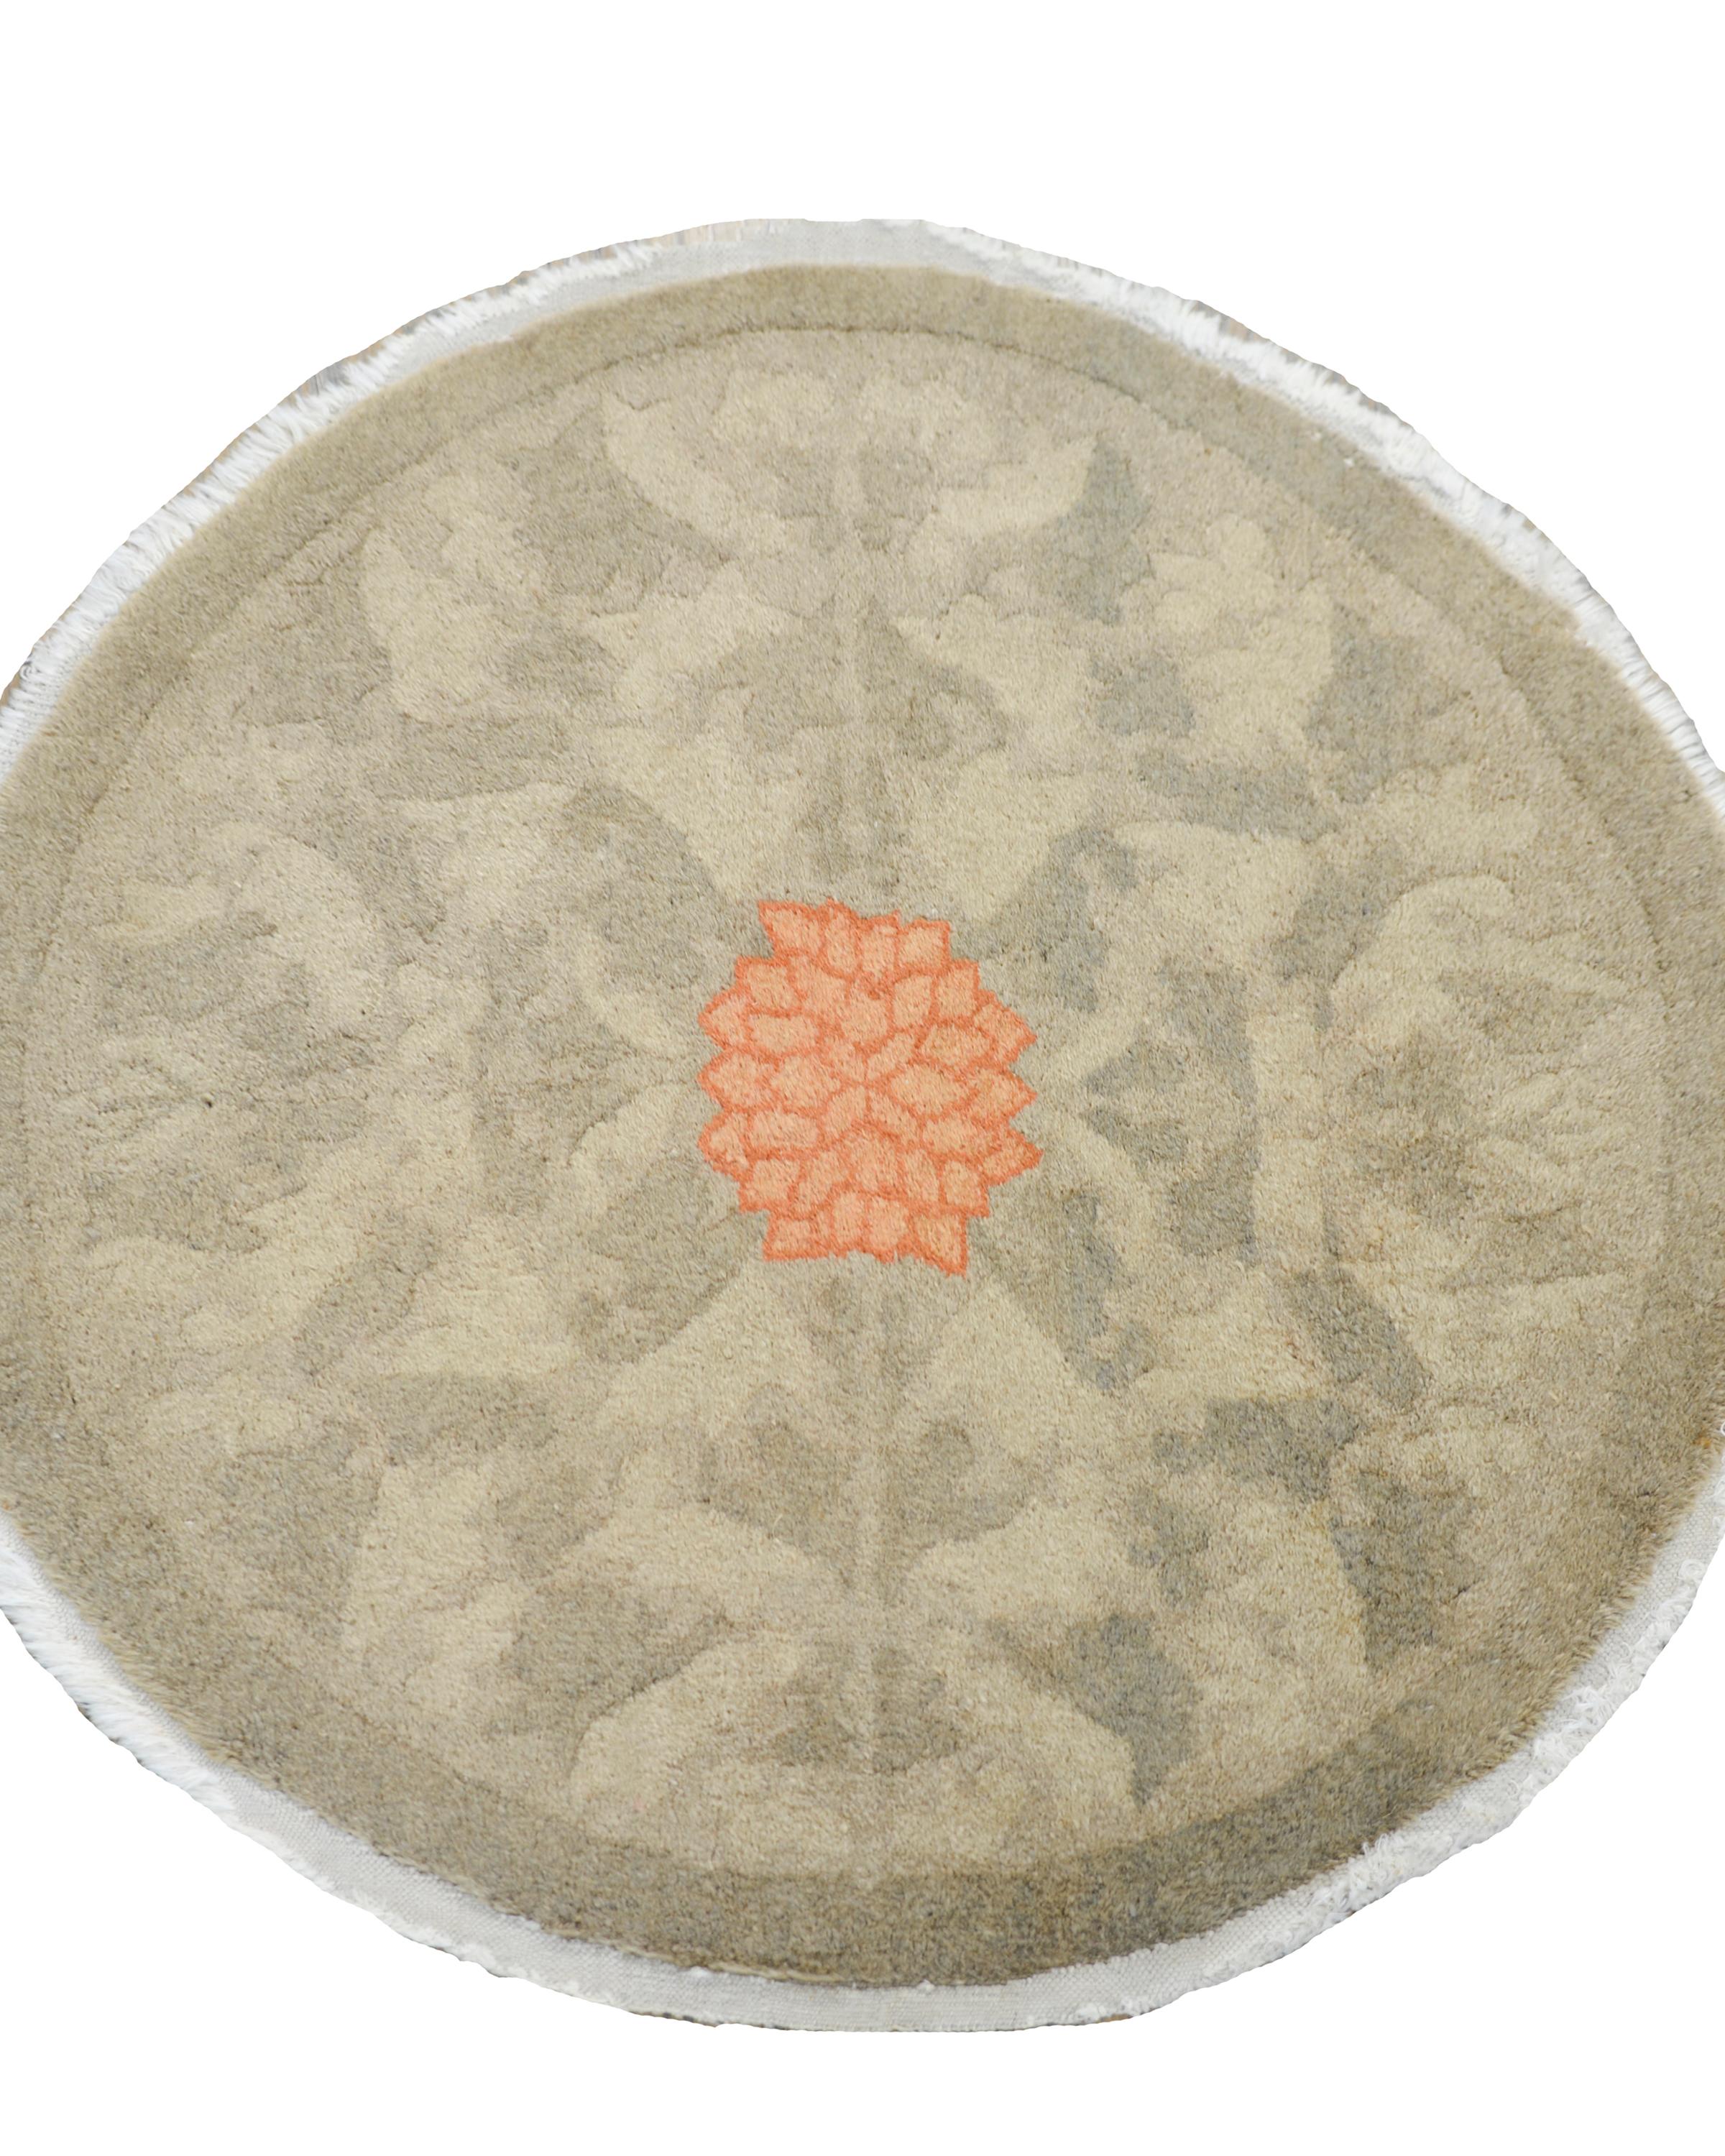 A wonderful early 20th century Chinese round rug with a central pink chrysanthemum amidst a tone-on-tone leaf and vine field.